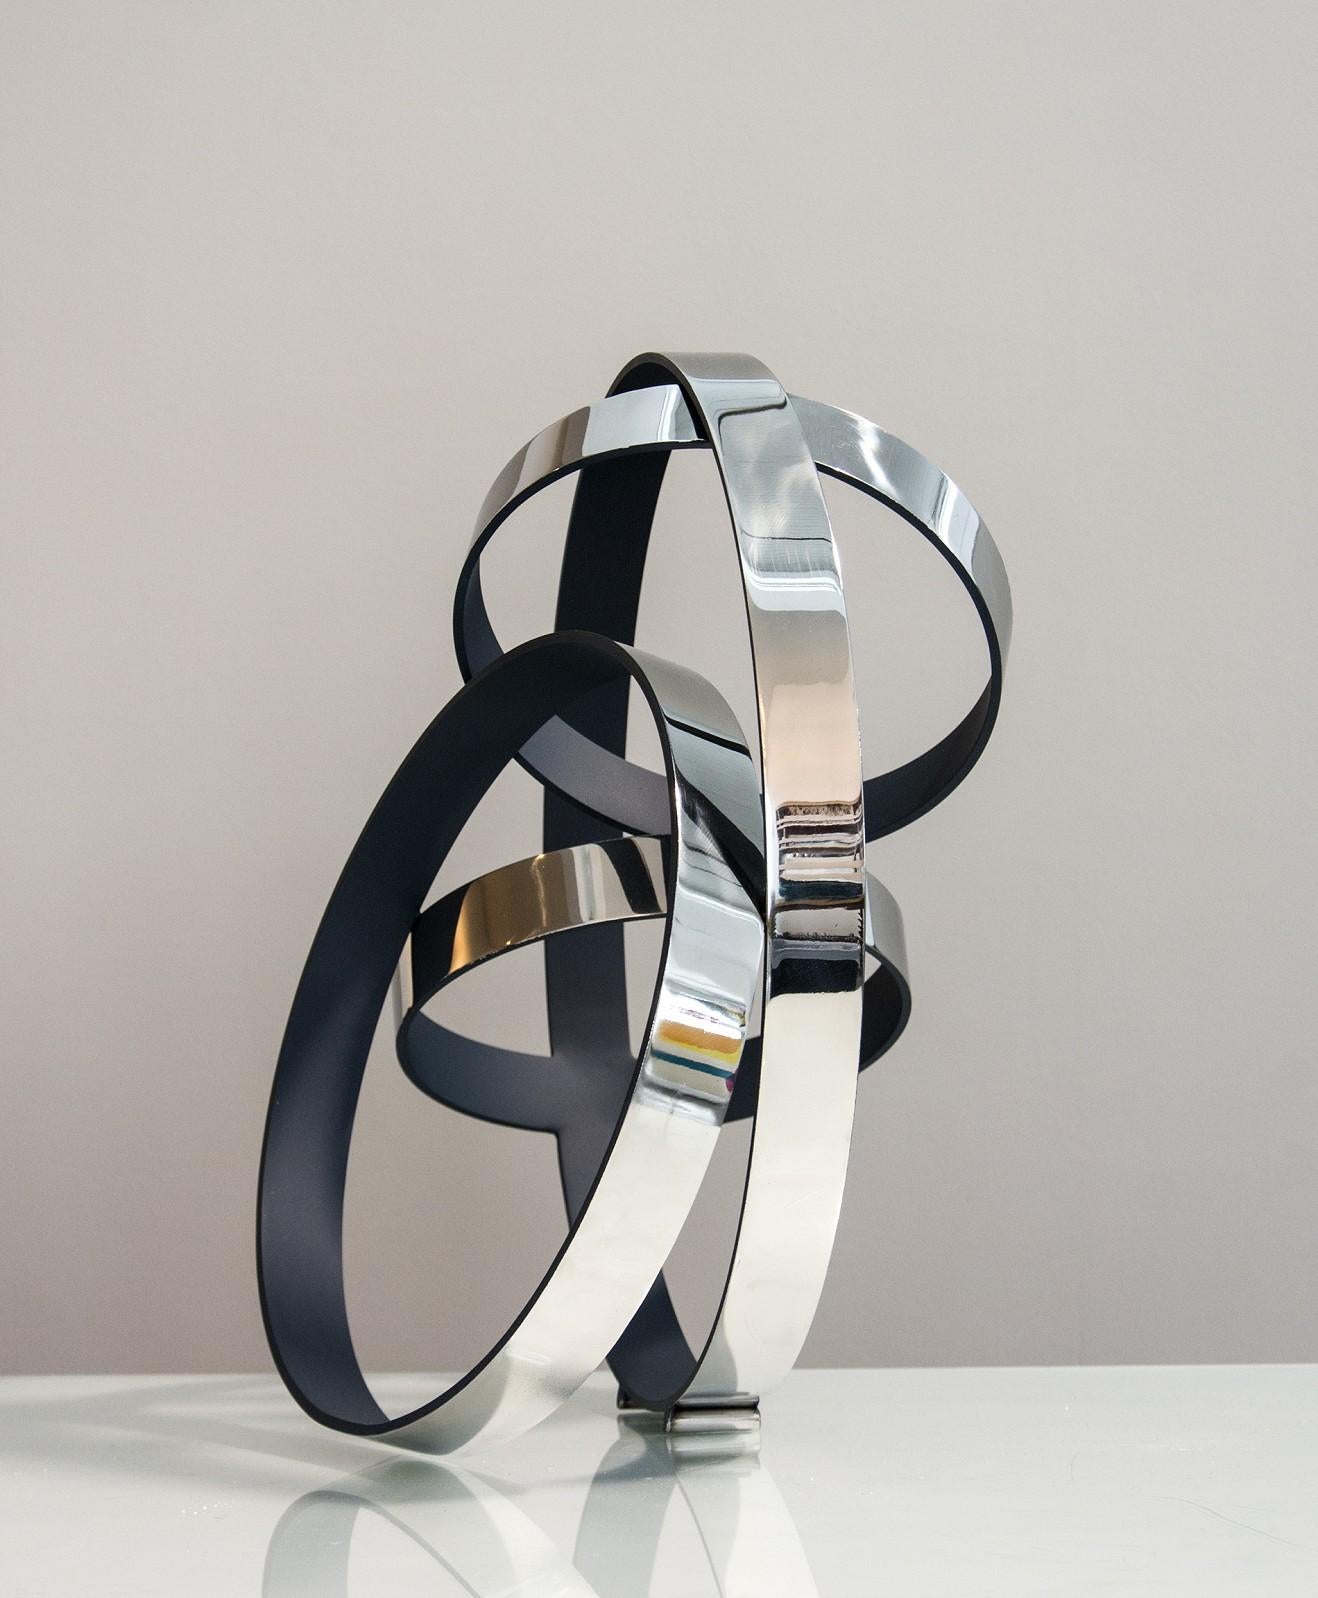 Four Ring Temps Zero Blue Poseidon 4/10 - Steel rings with blue interior - Sculpture by Philippe Pallafray